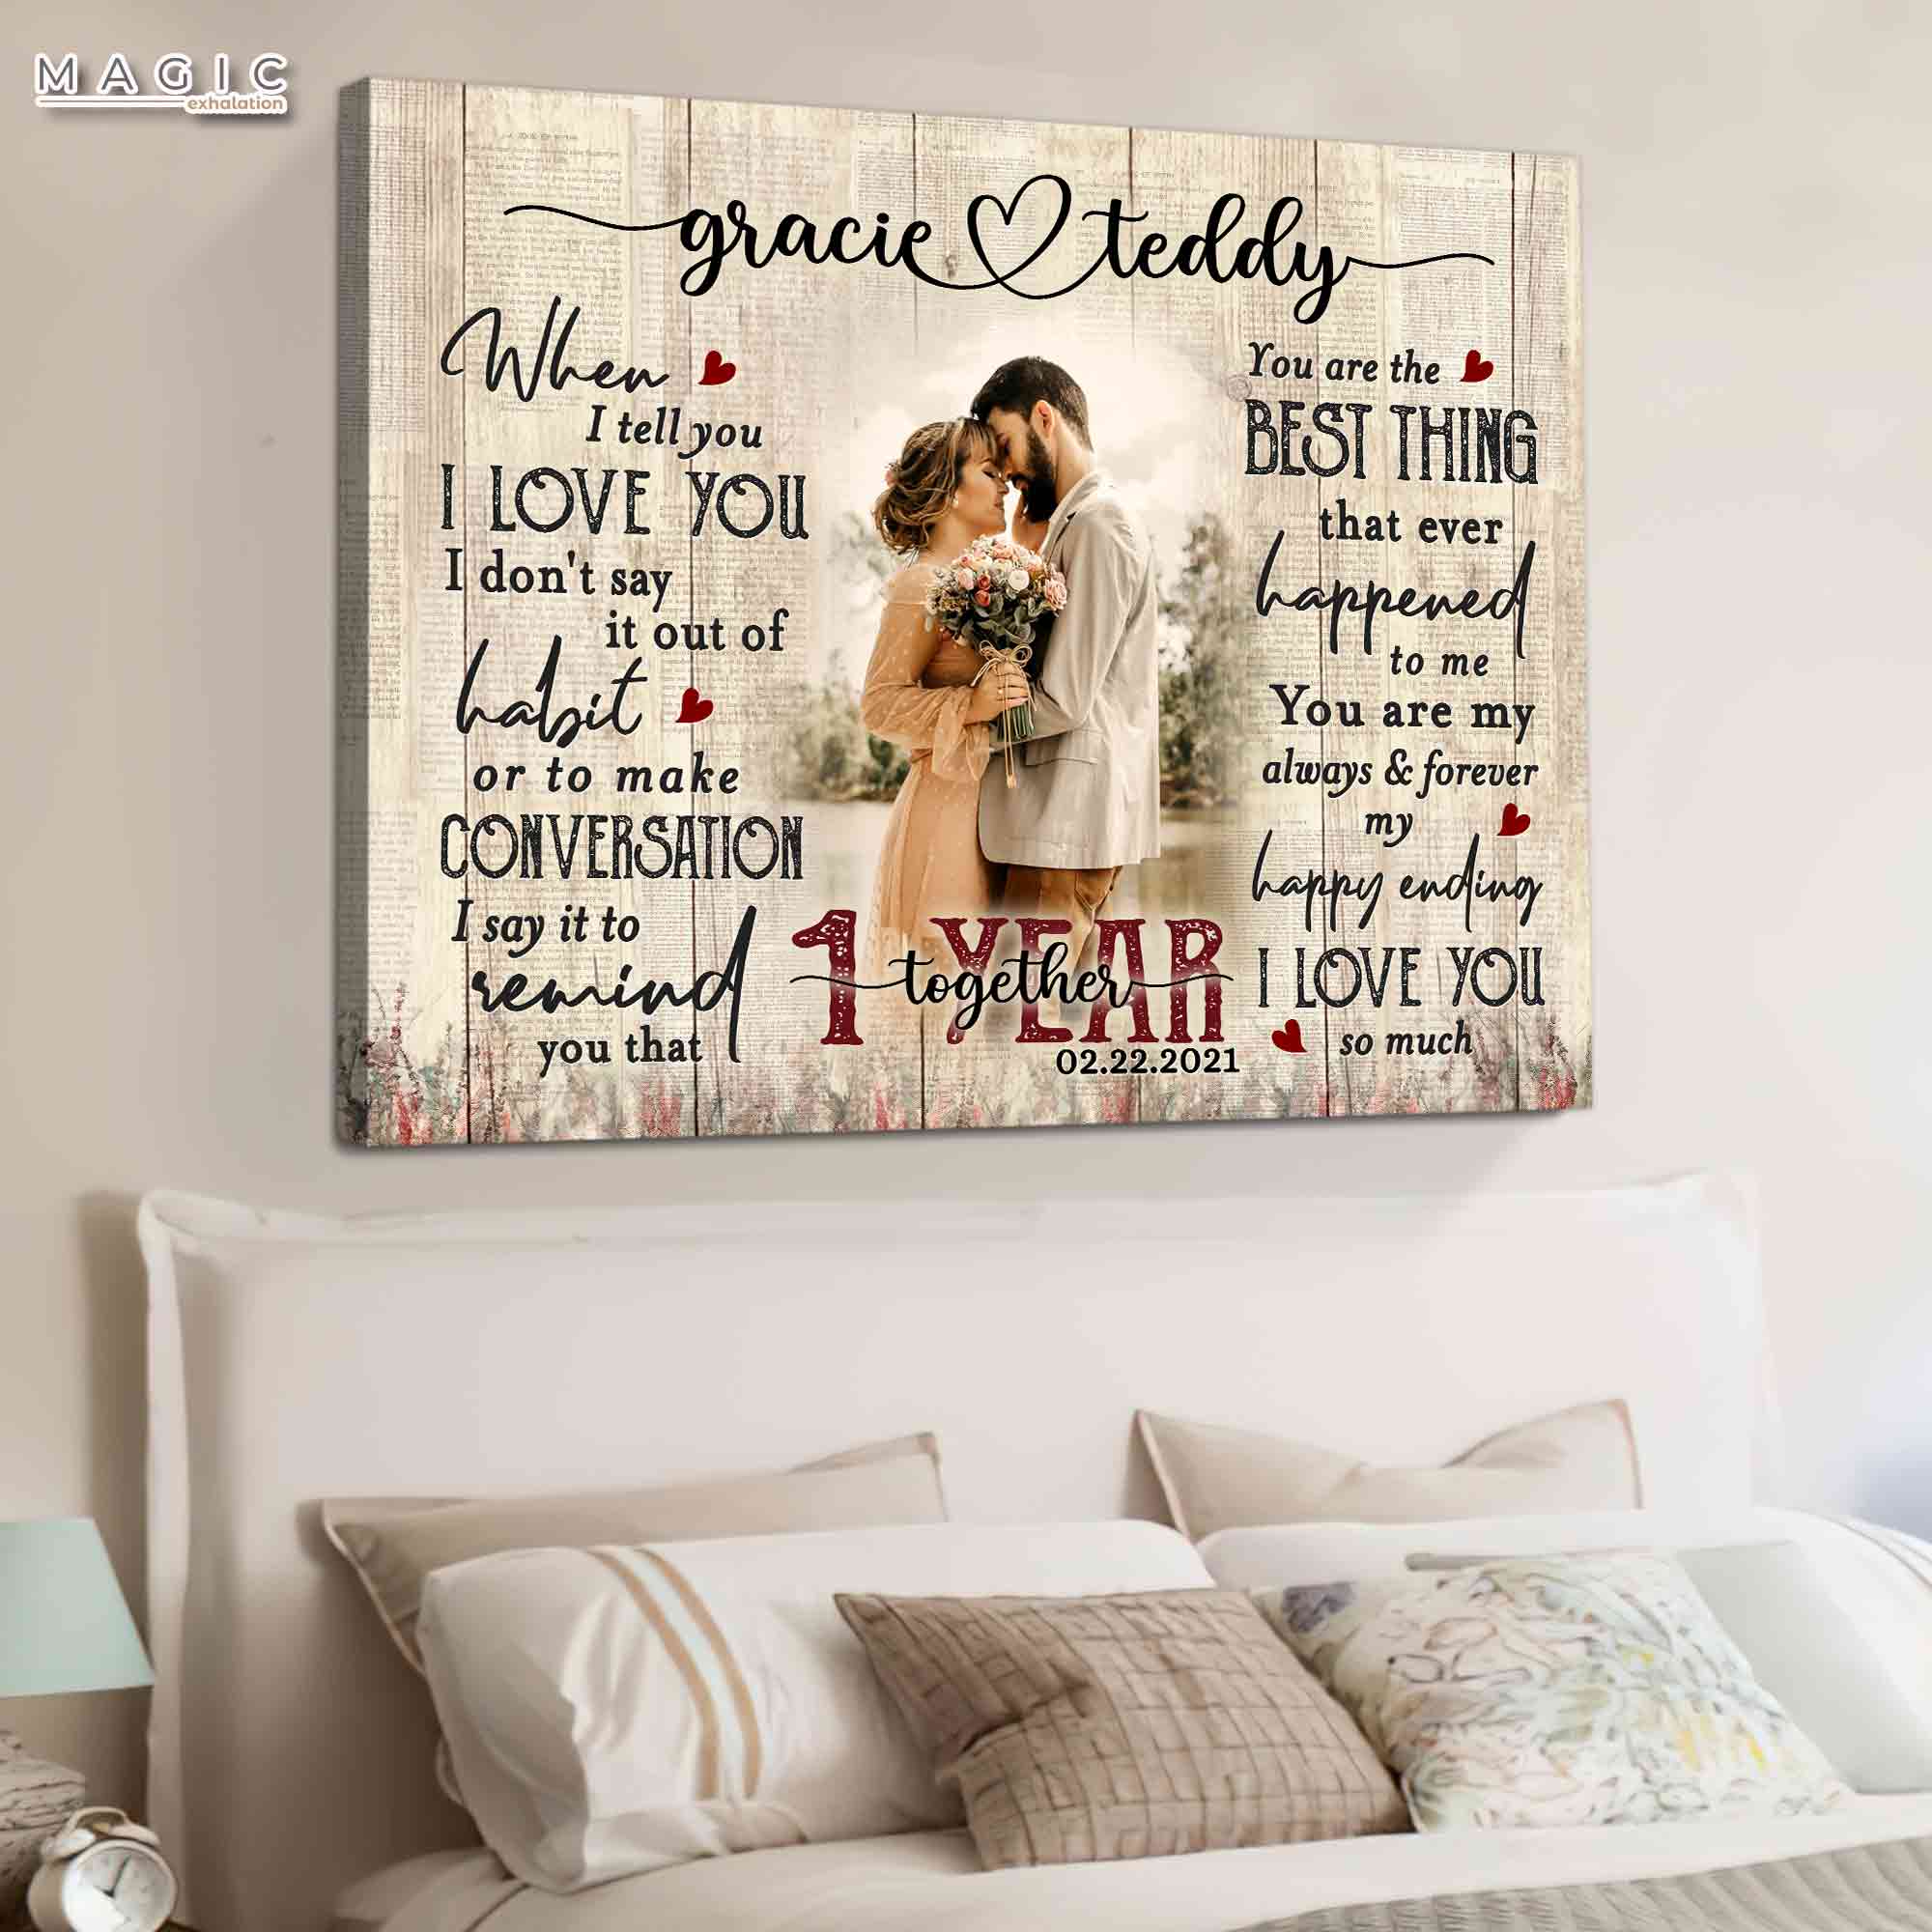 gift ideas for a first wedding anniversary, ideas for a first wedding anniversary gift